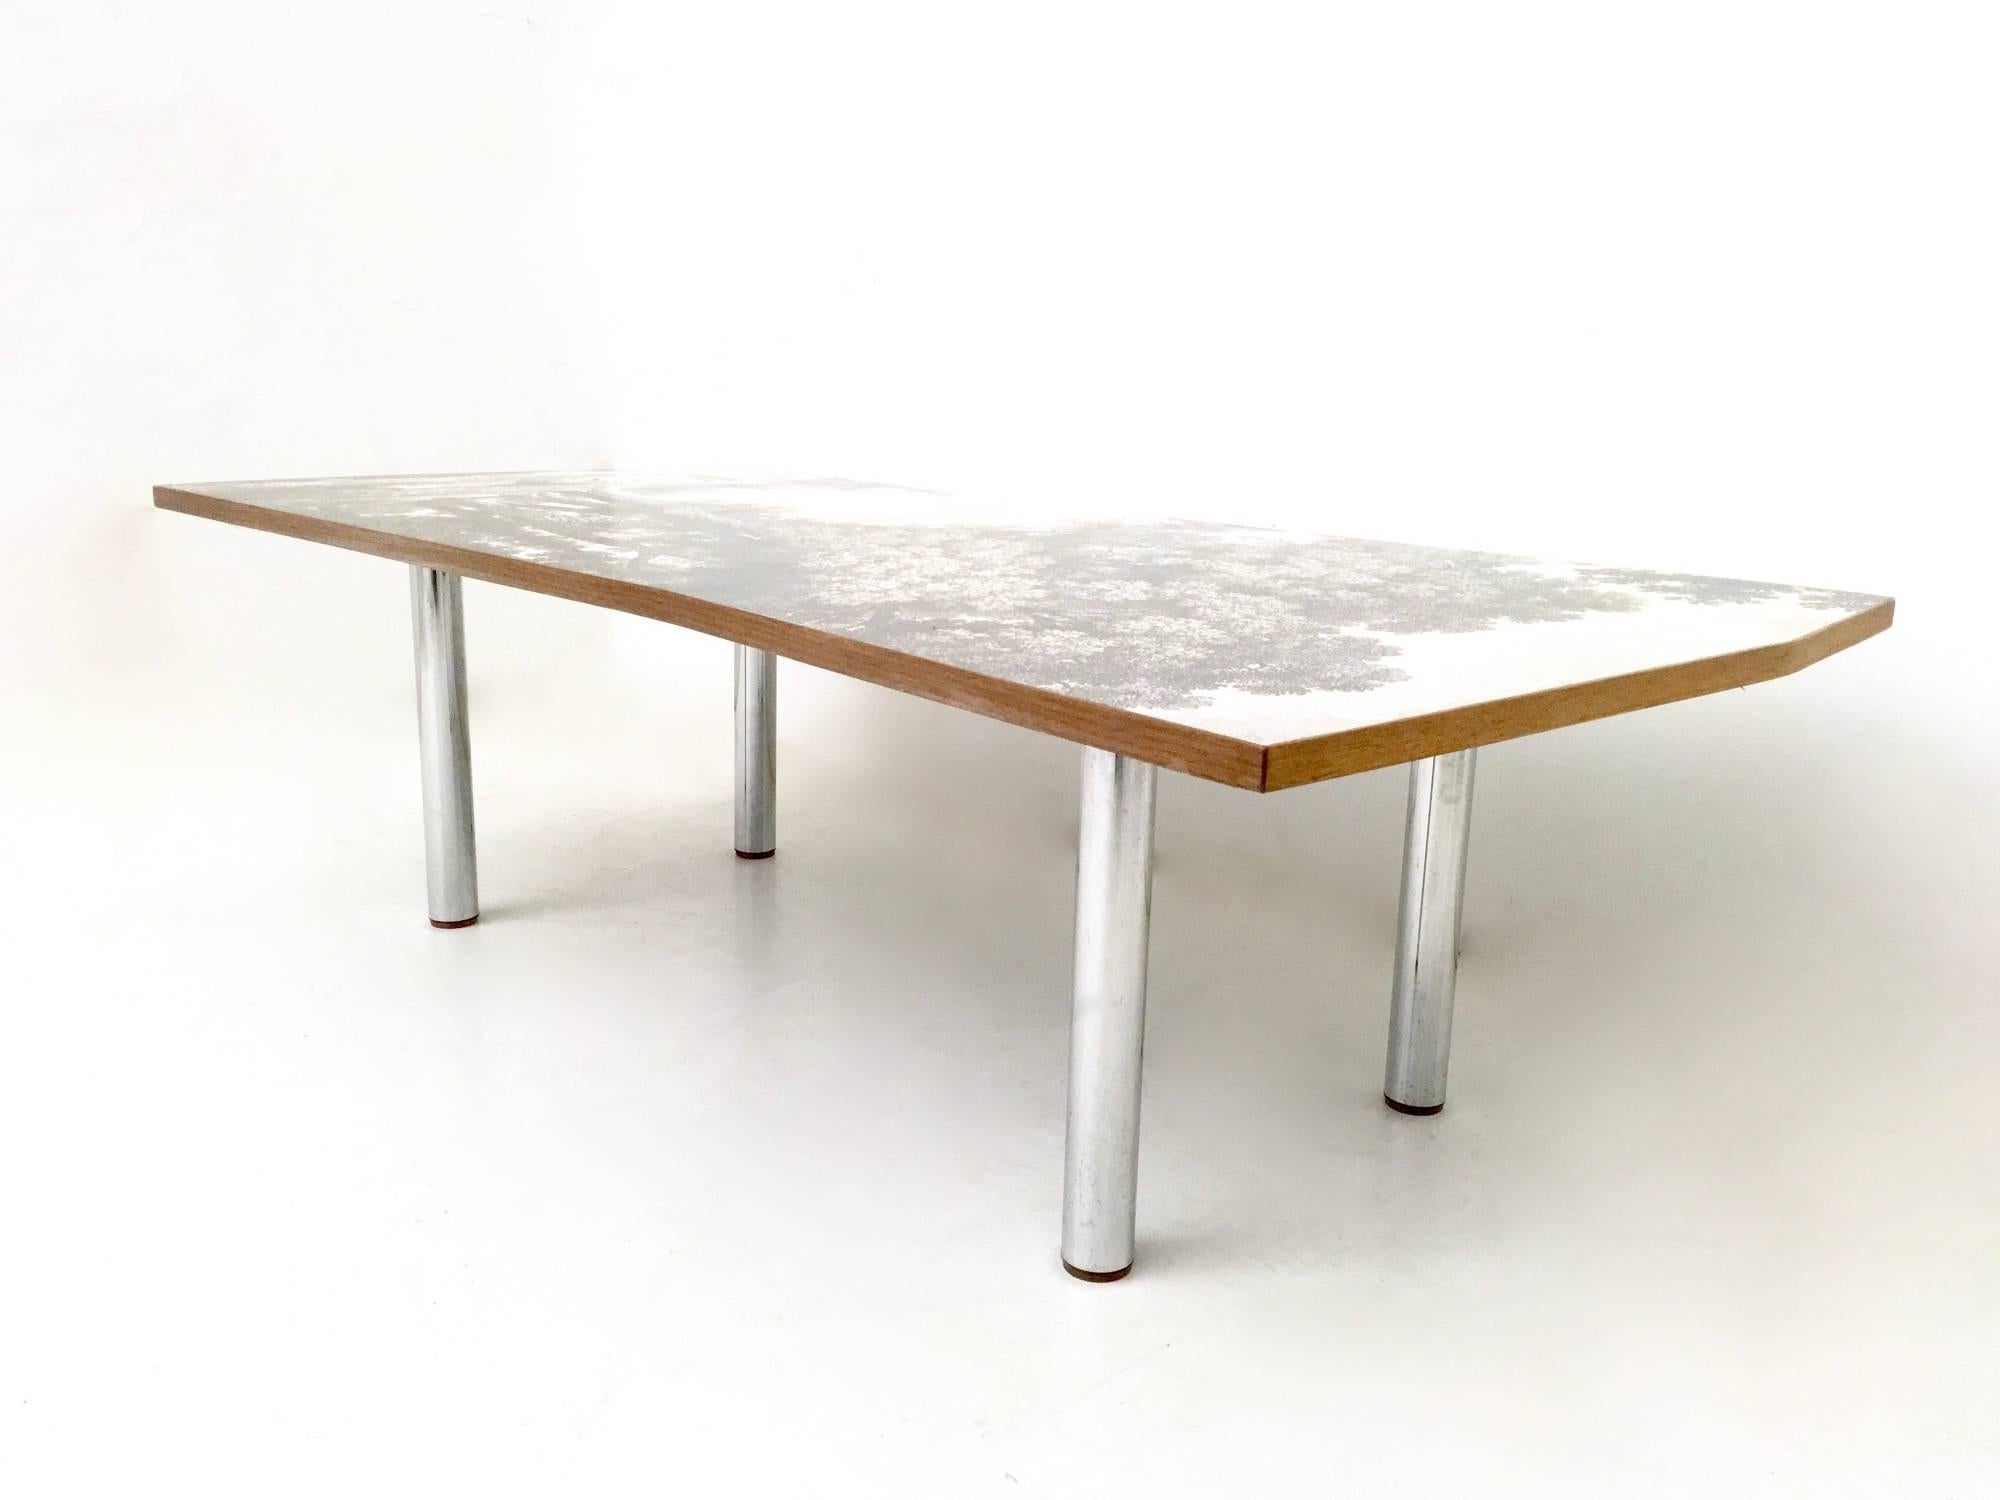 This is a wooden coffee table that features screwable steel legs and a printed top.
In mint condition and ready to become a piece in a home.

